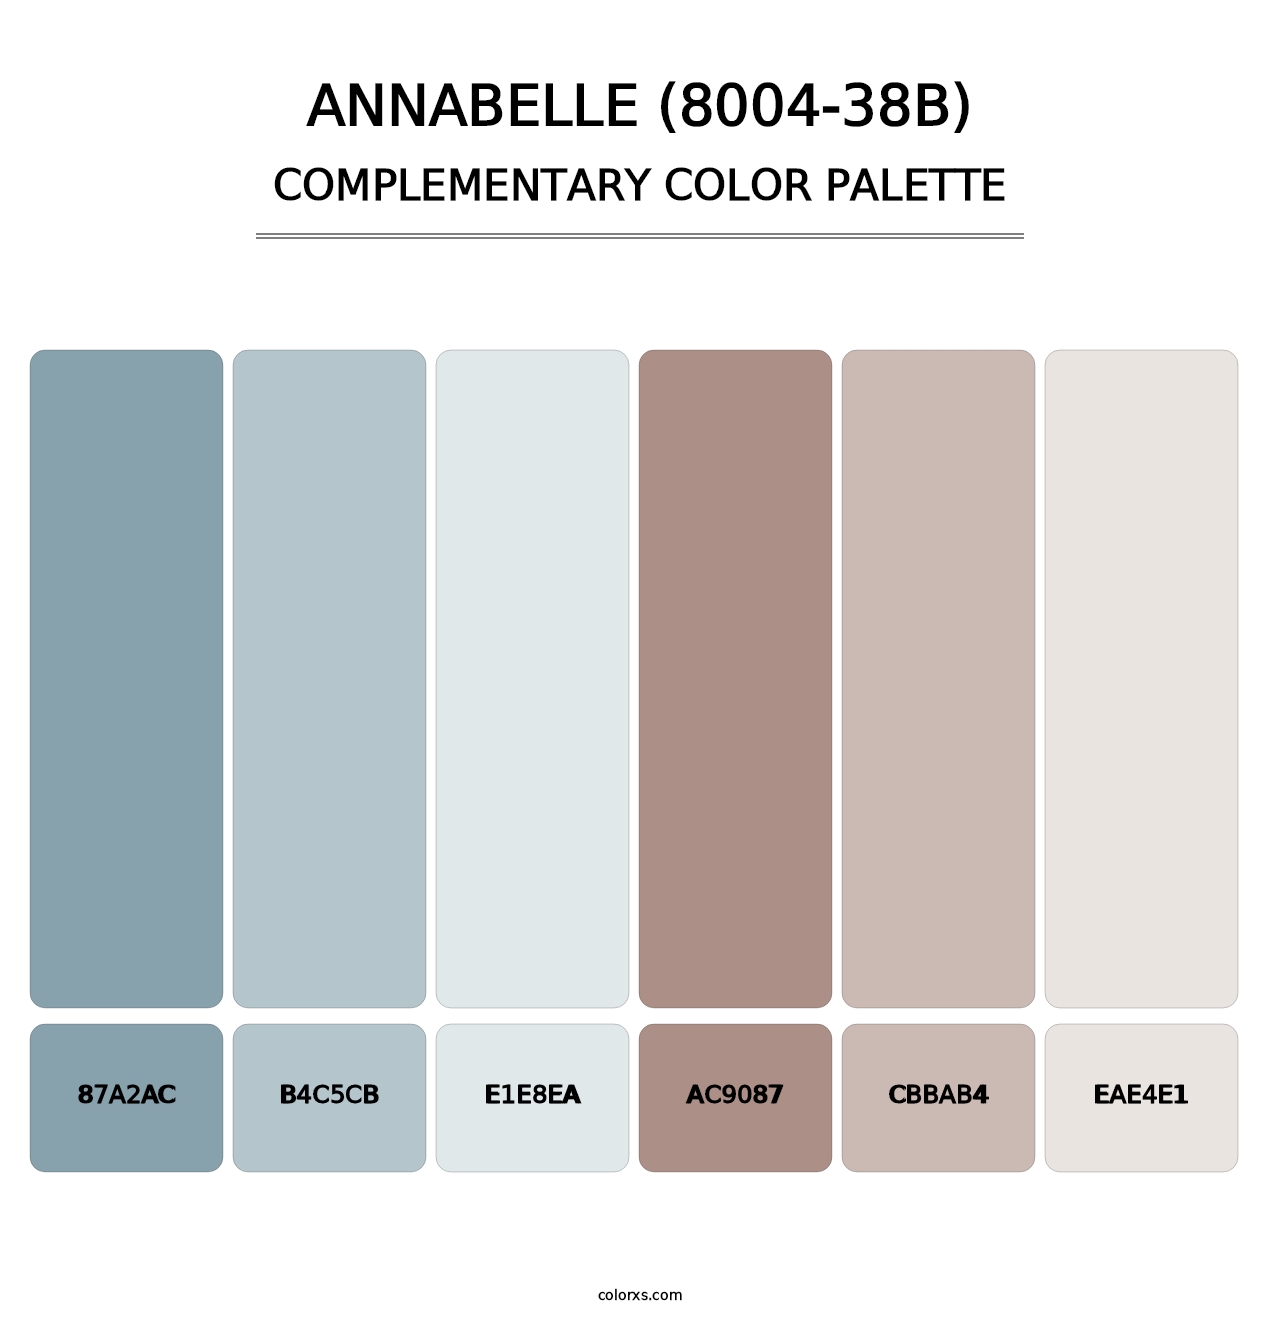 Annabelle (8004-38B) - Complementary Color Palette